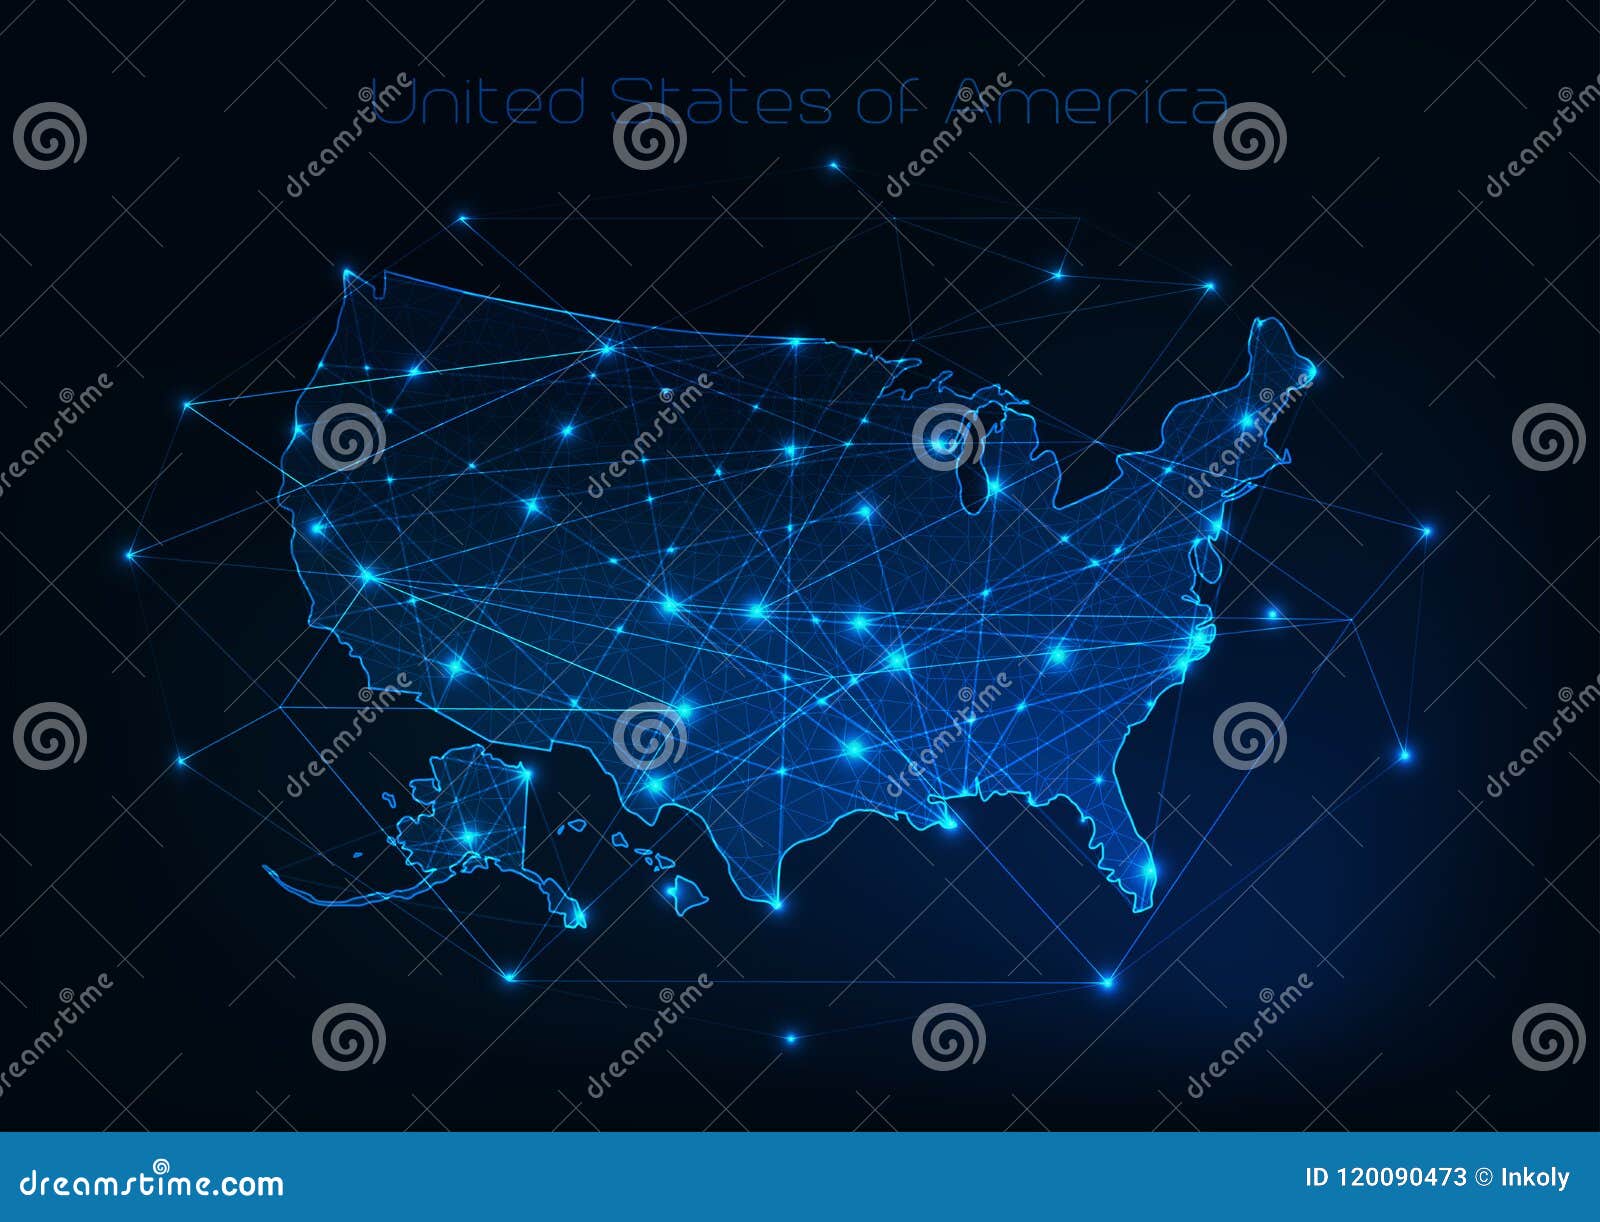 united states of america usa map outline with stars and lines abstract framework.